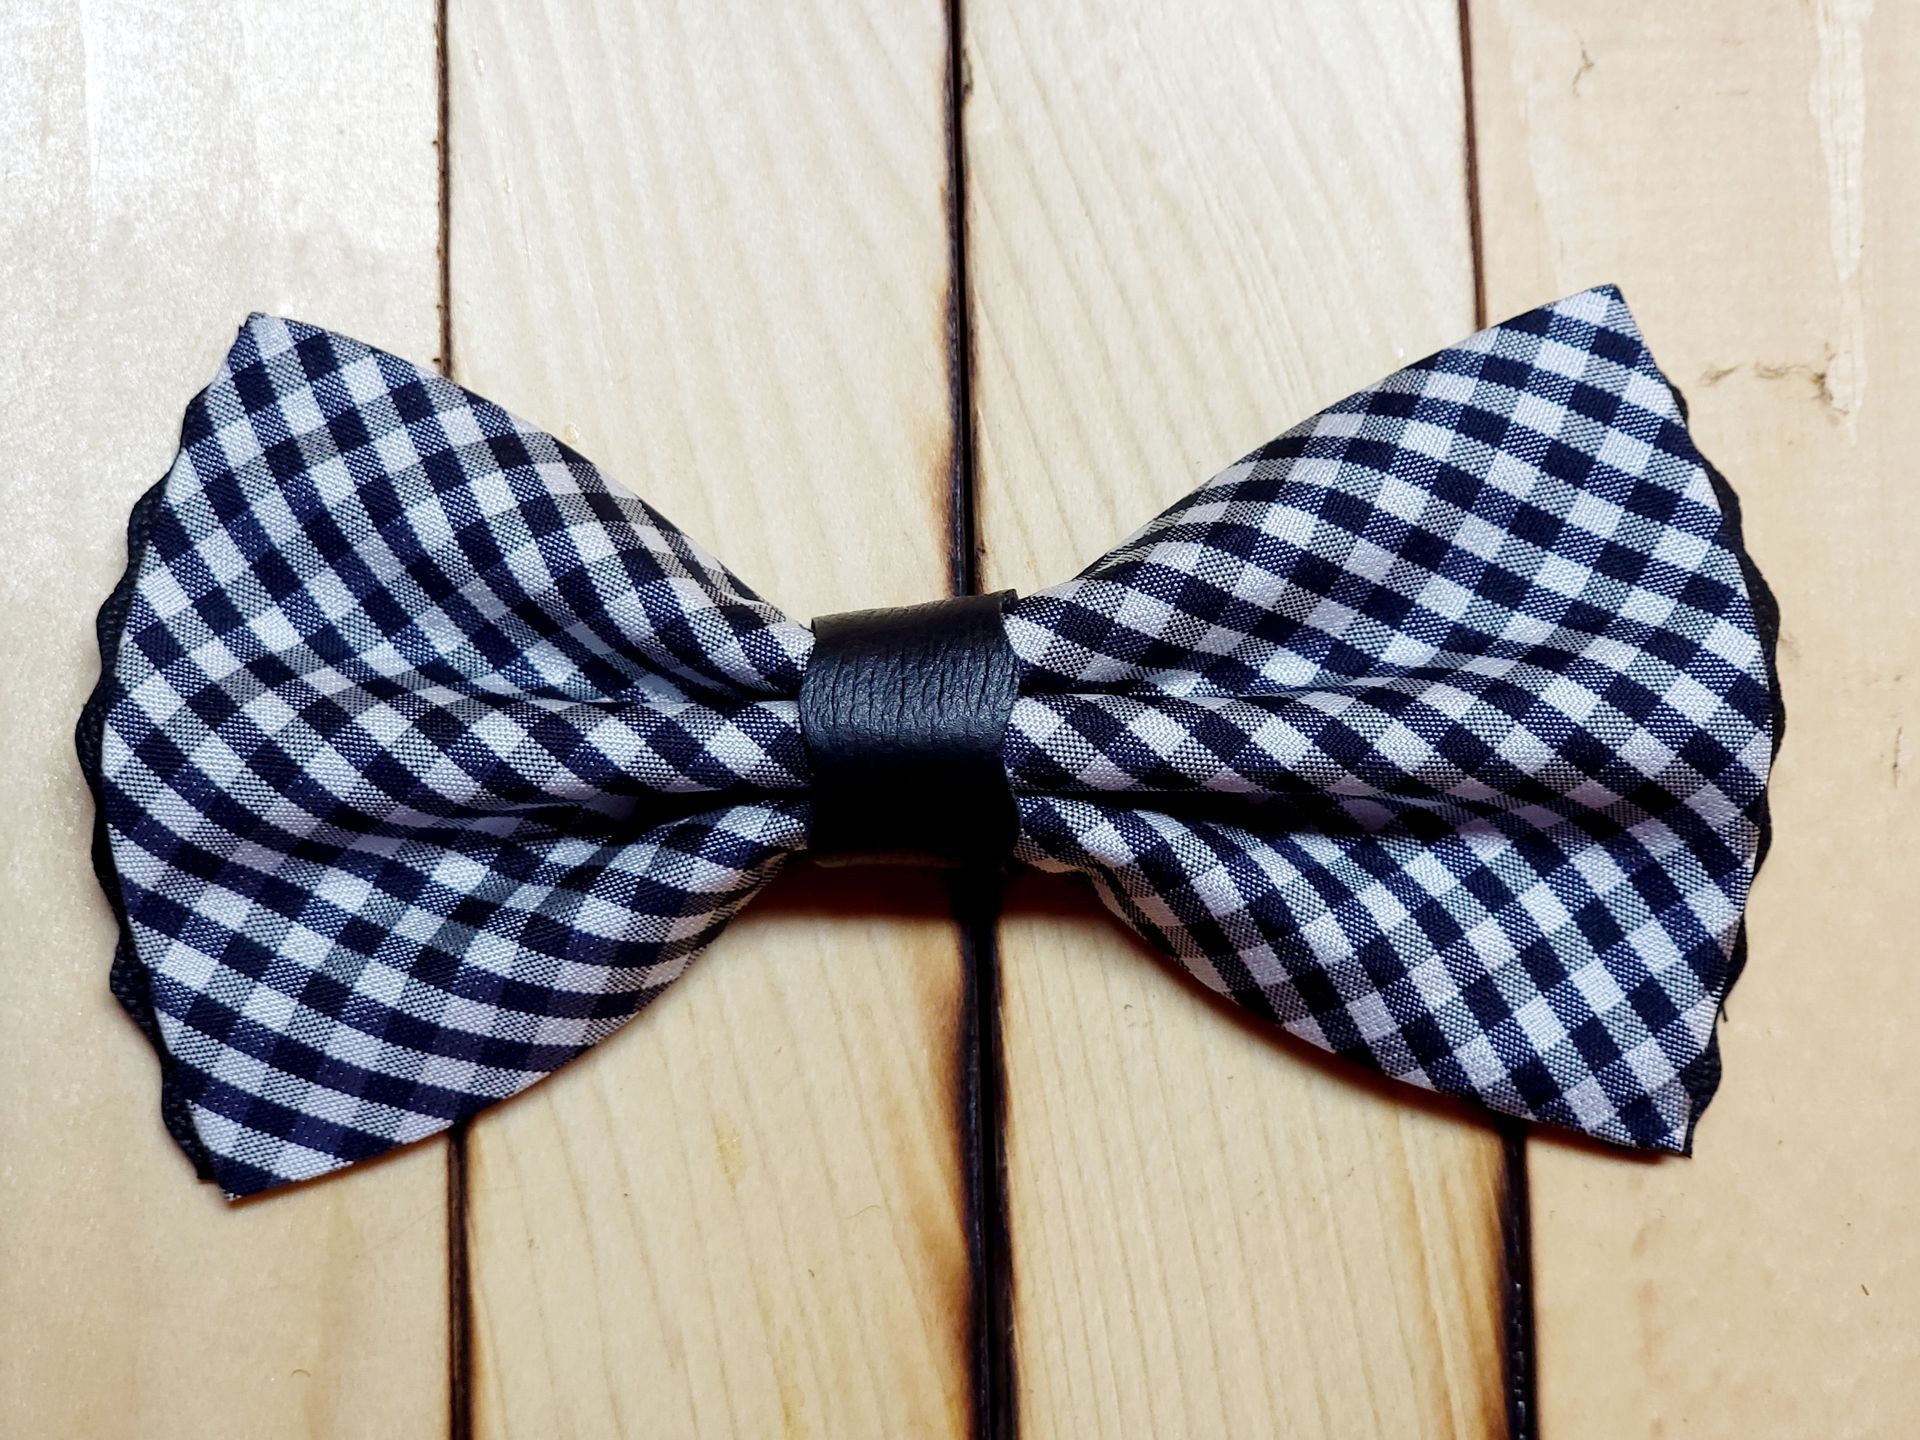 The Elmer BowTie from HipBows